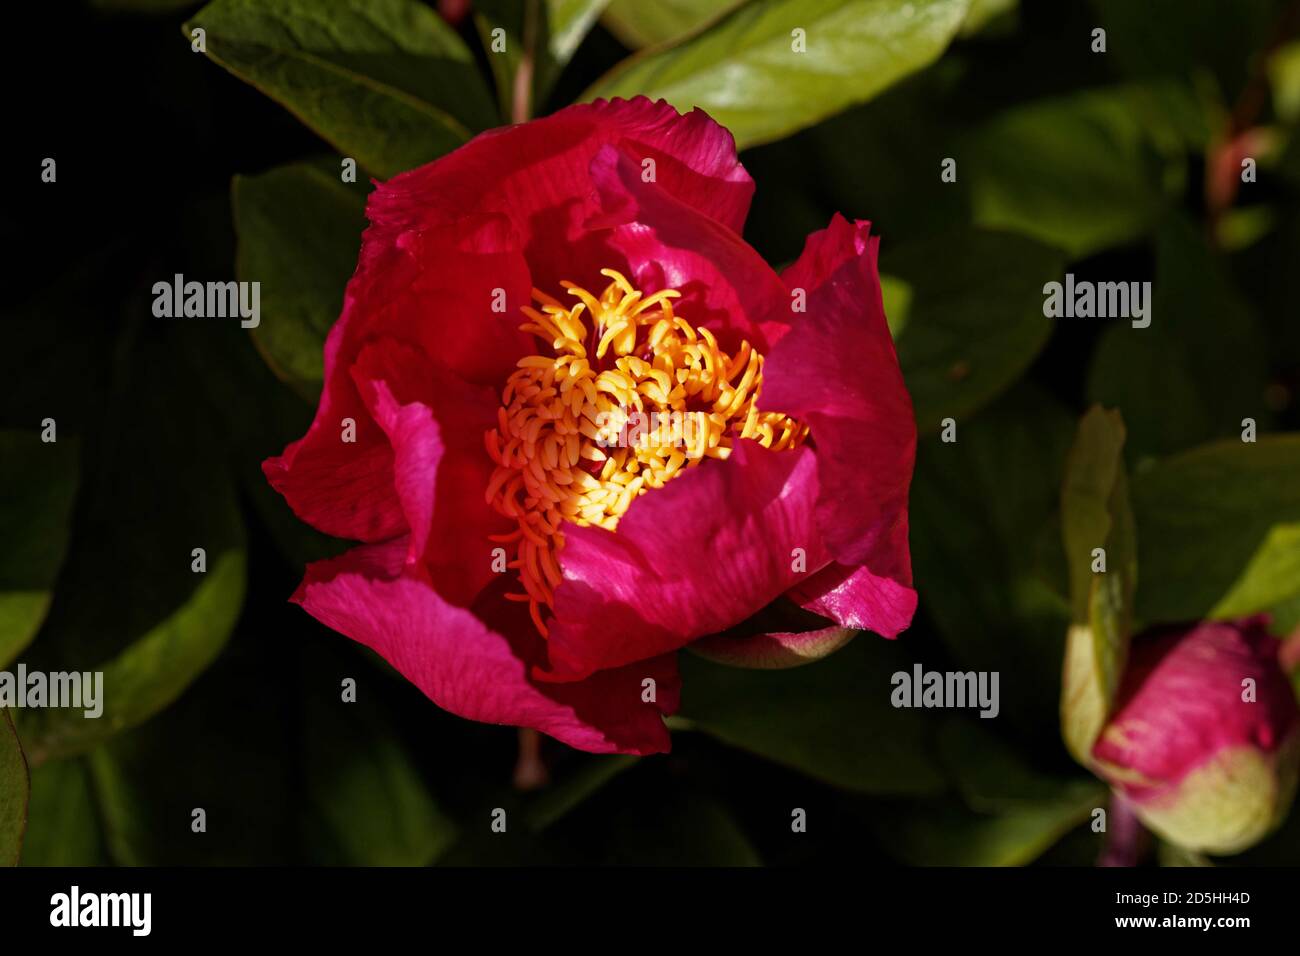 Paeonia officinalis, the common peony, or garden peony, is a species of flowering plant in the family Paeoniaceae, native to France, Switzerland Italy. Stock Photo